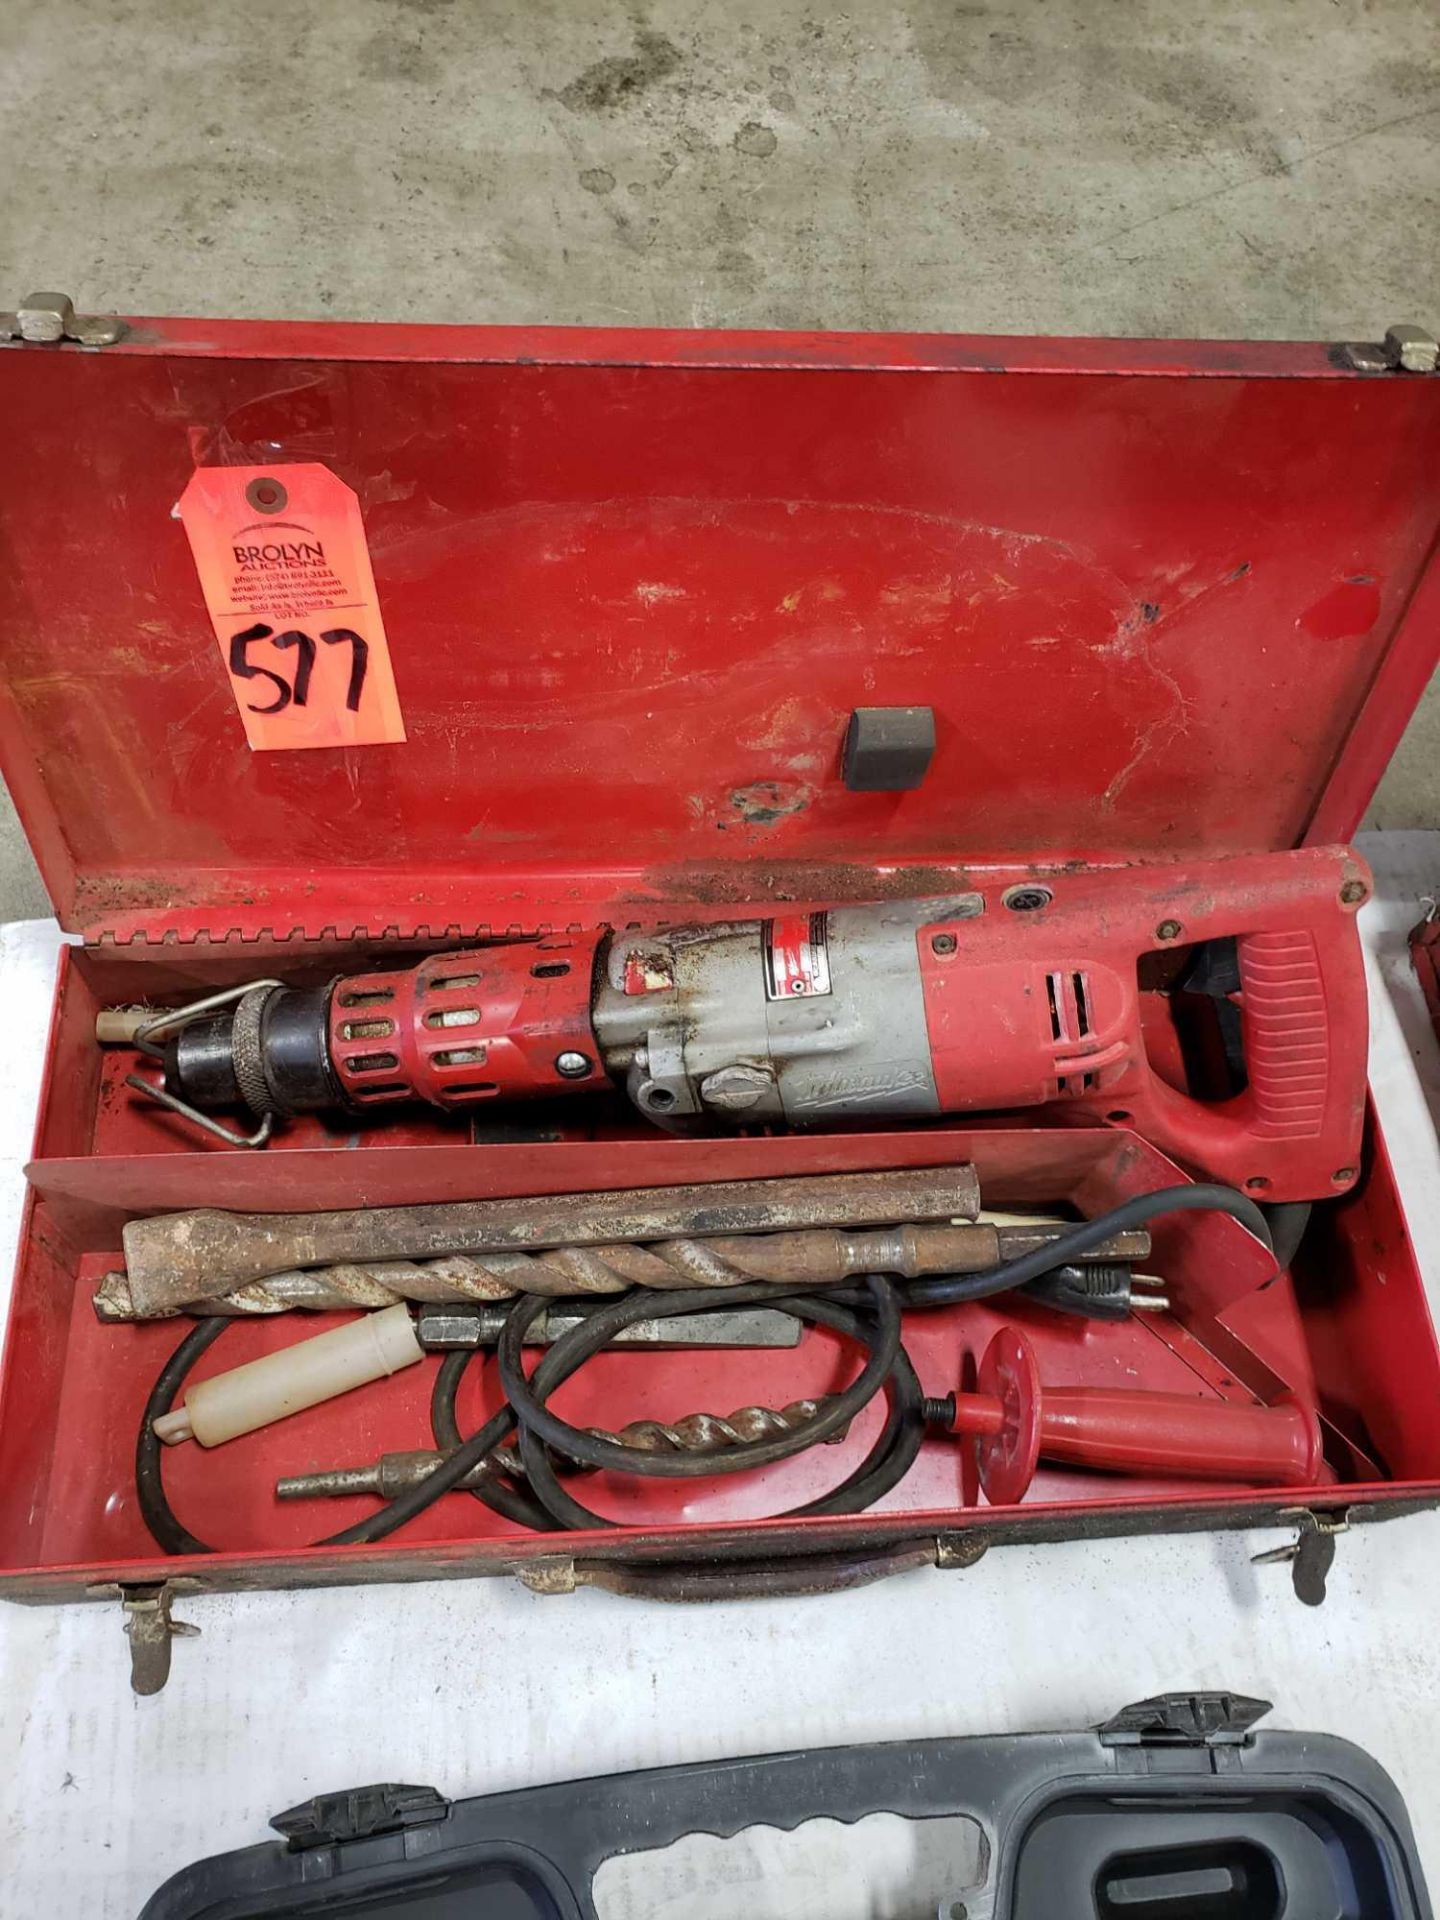 Milwaukee rotary hammer drill model 5351 single phase 110v with case and bits. - Image 3 of 5